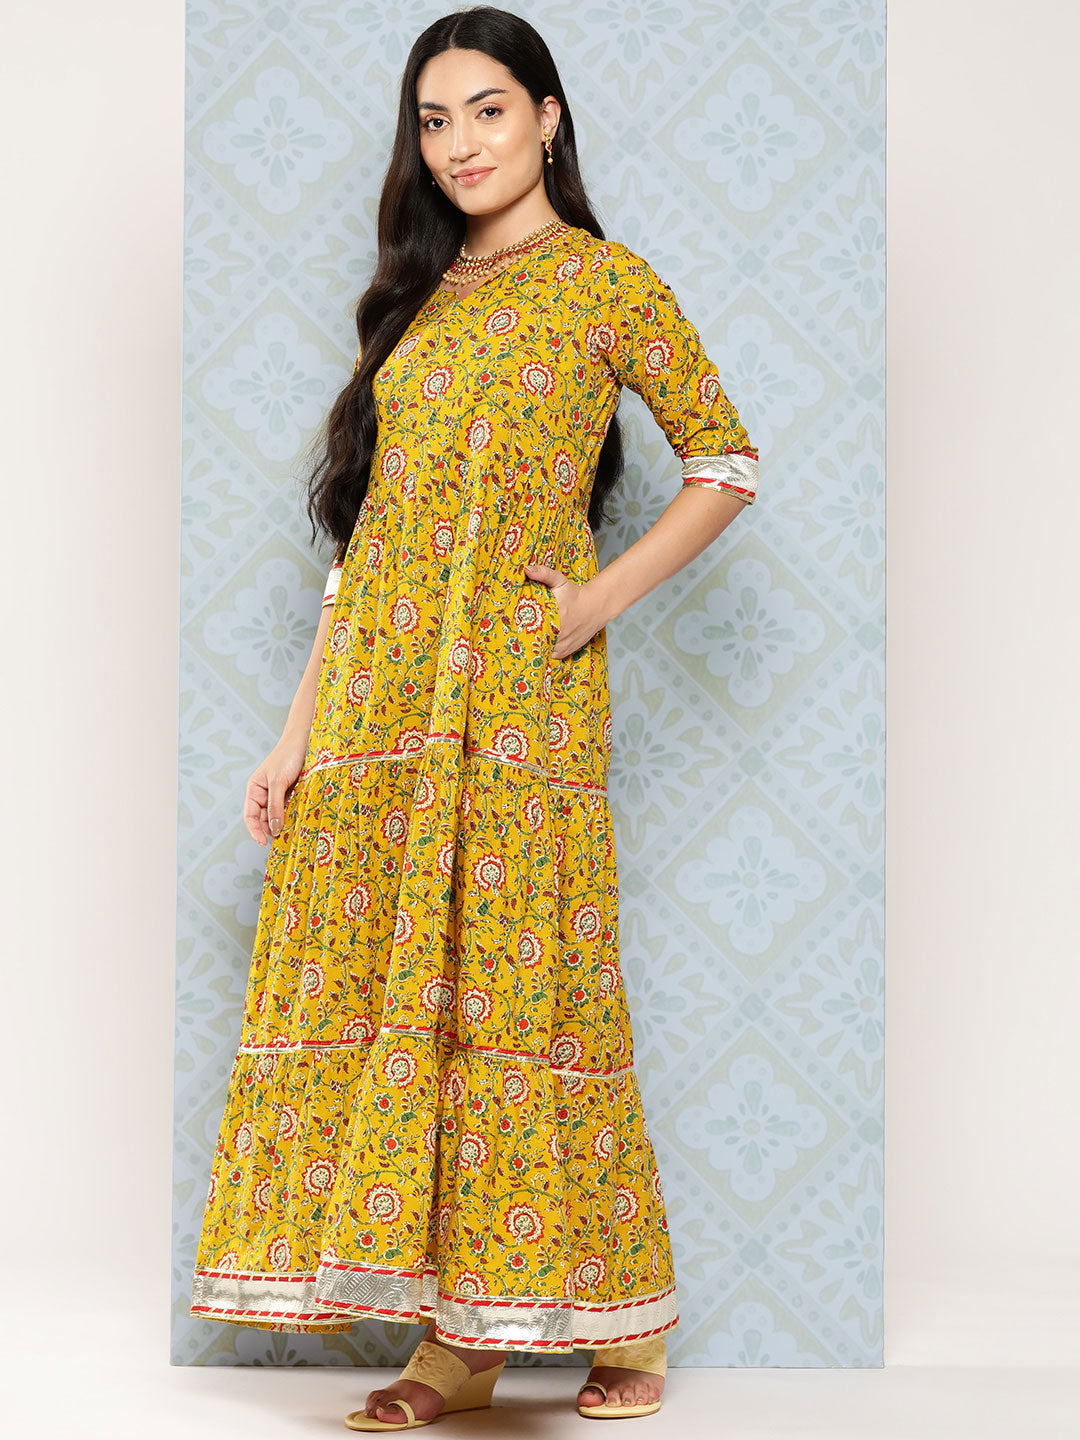 Women's Yellow Floral Printed Flared Dress With Scalloped Dupatta - Nayo Clothing